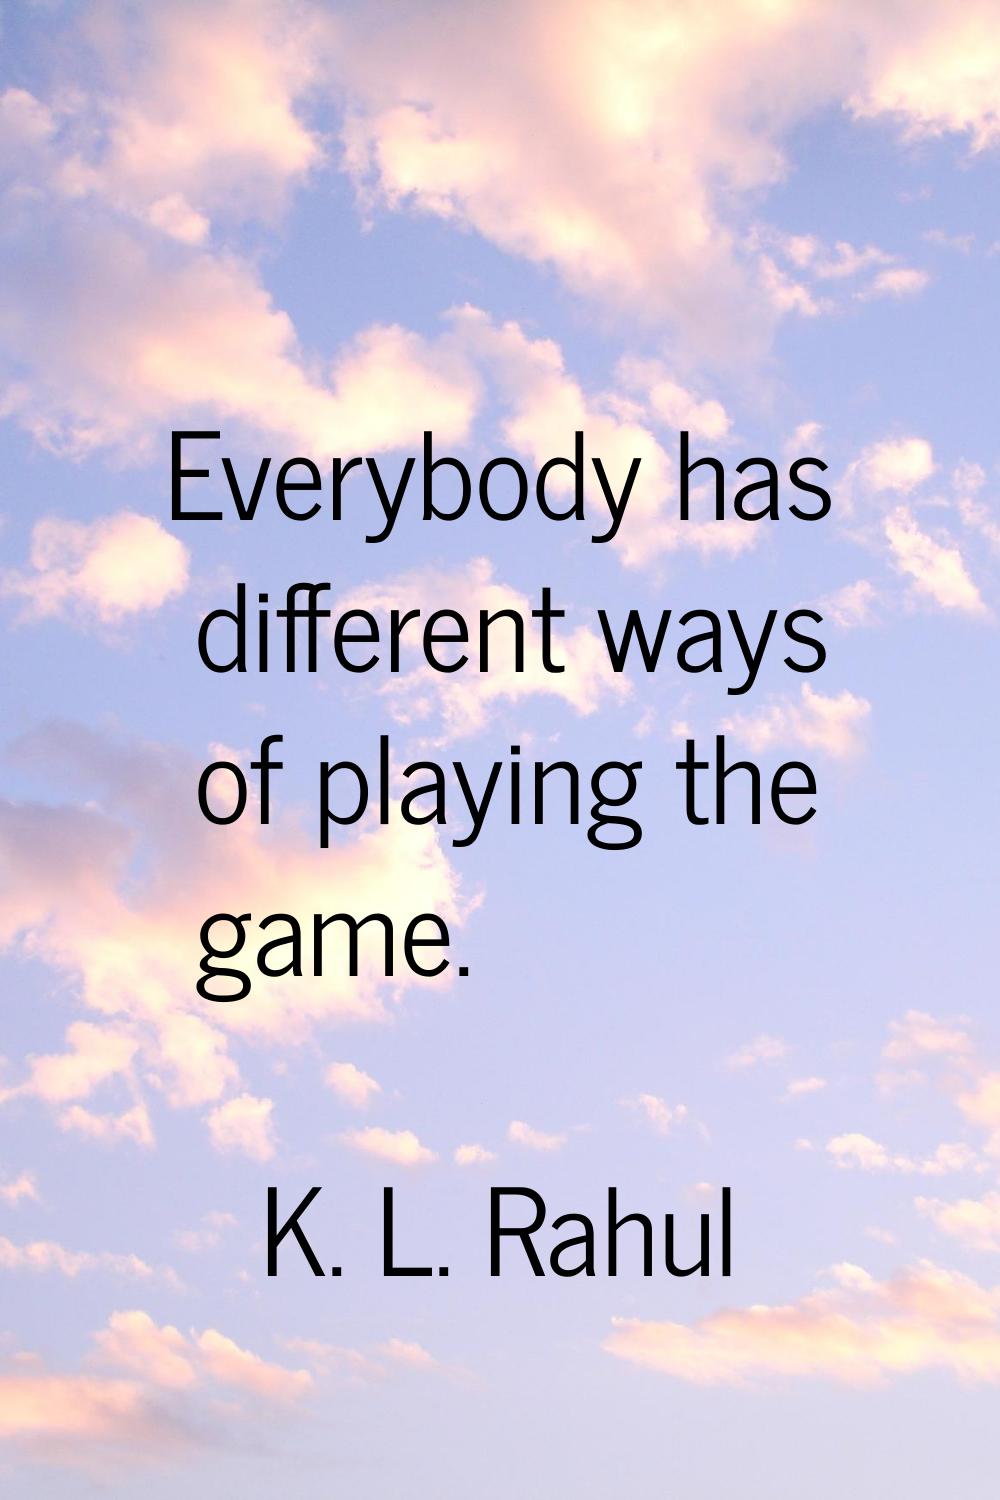 Everybody has different ways of playing the game.